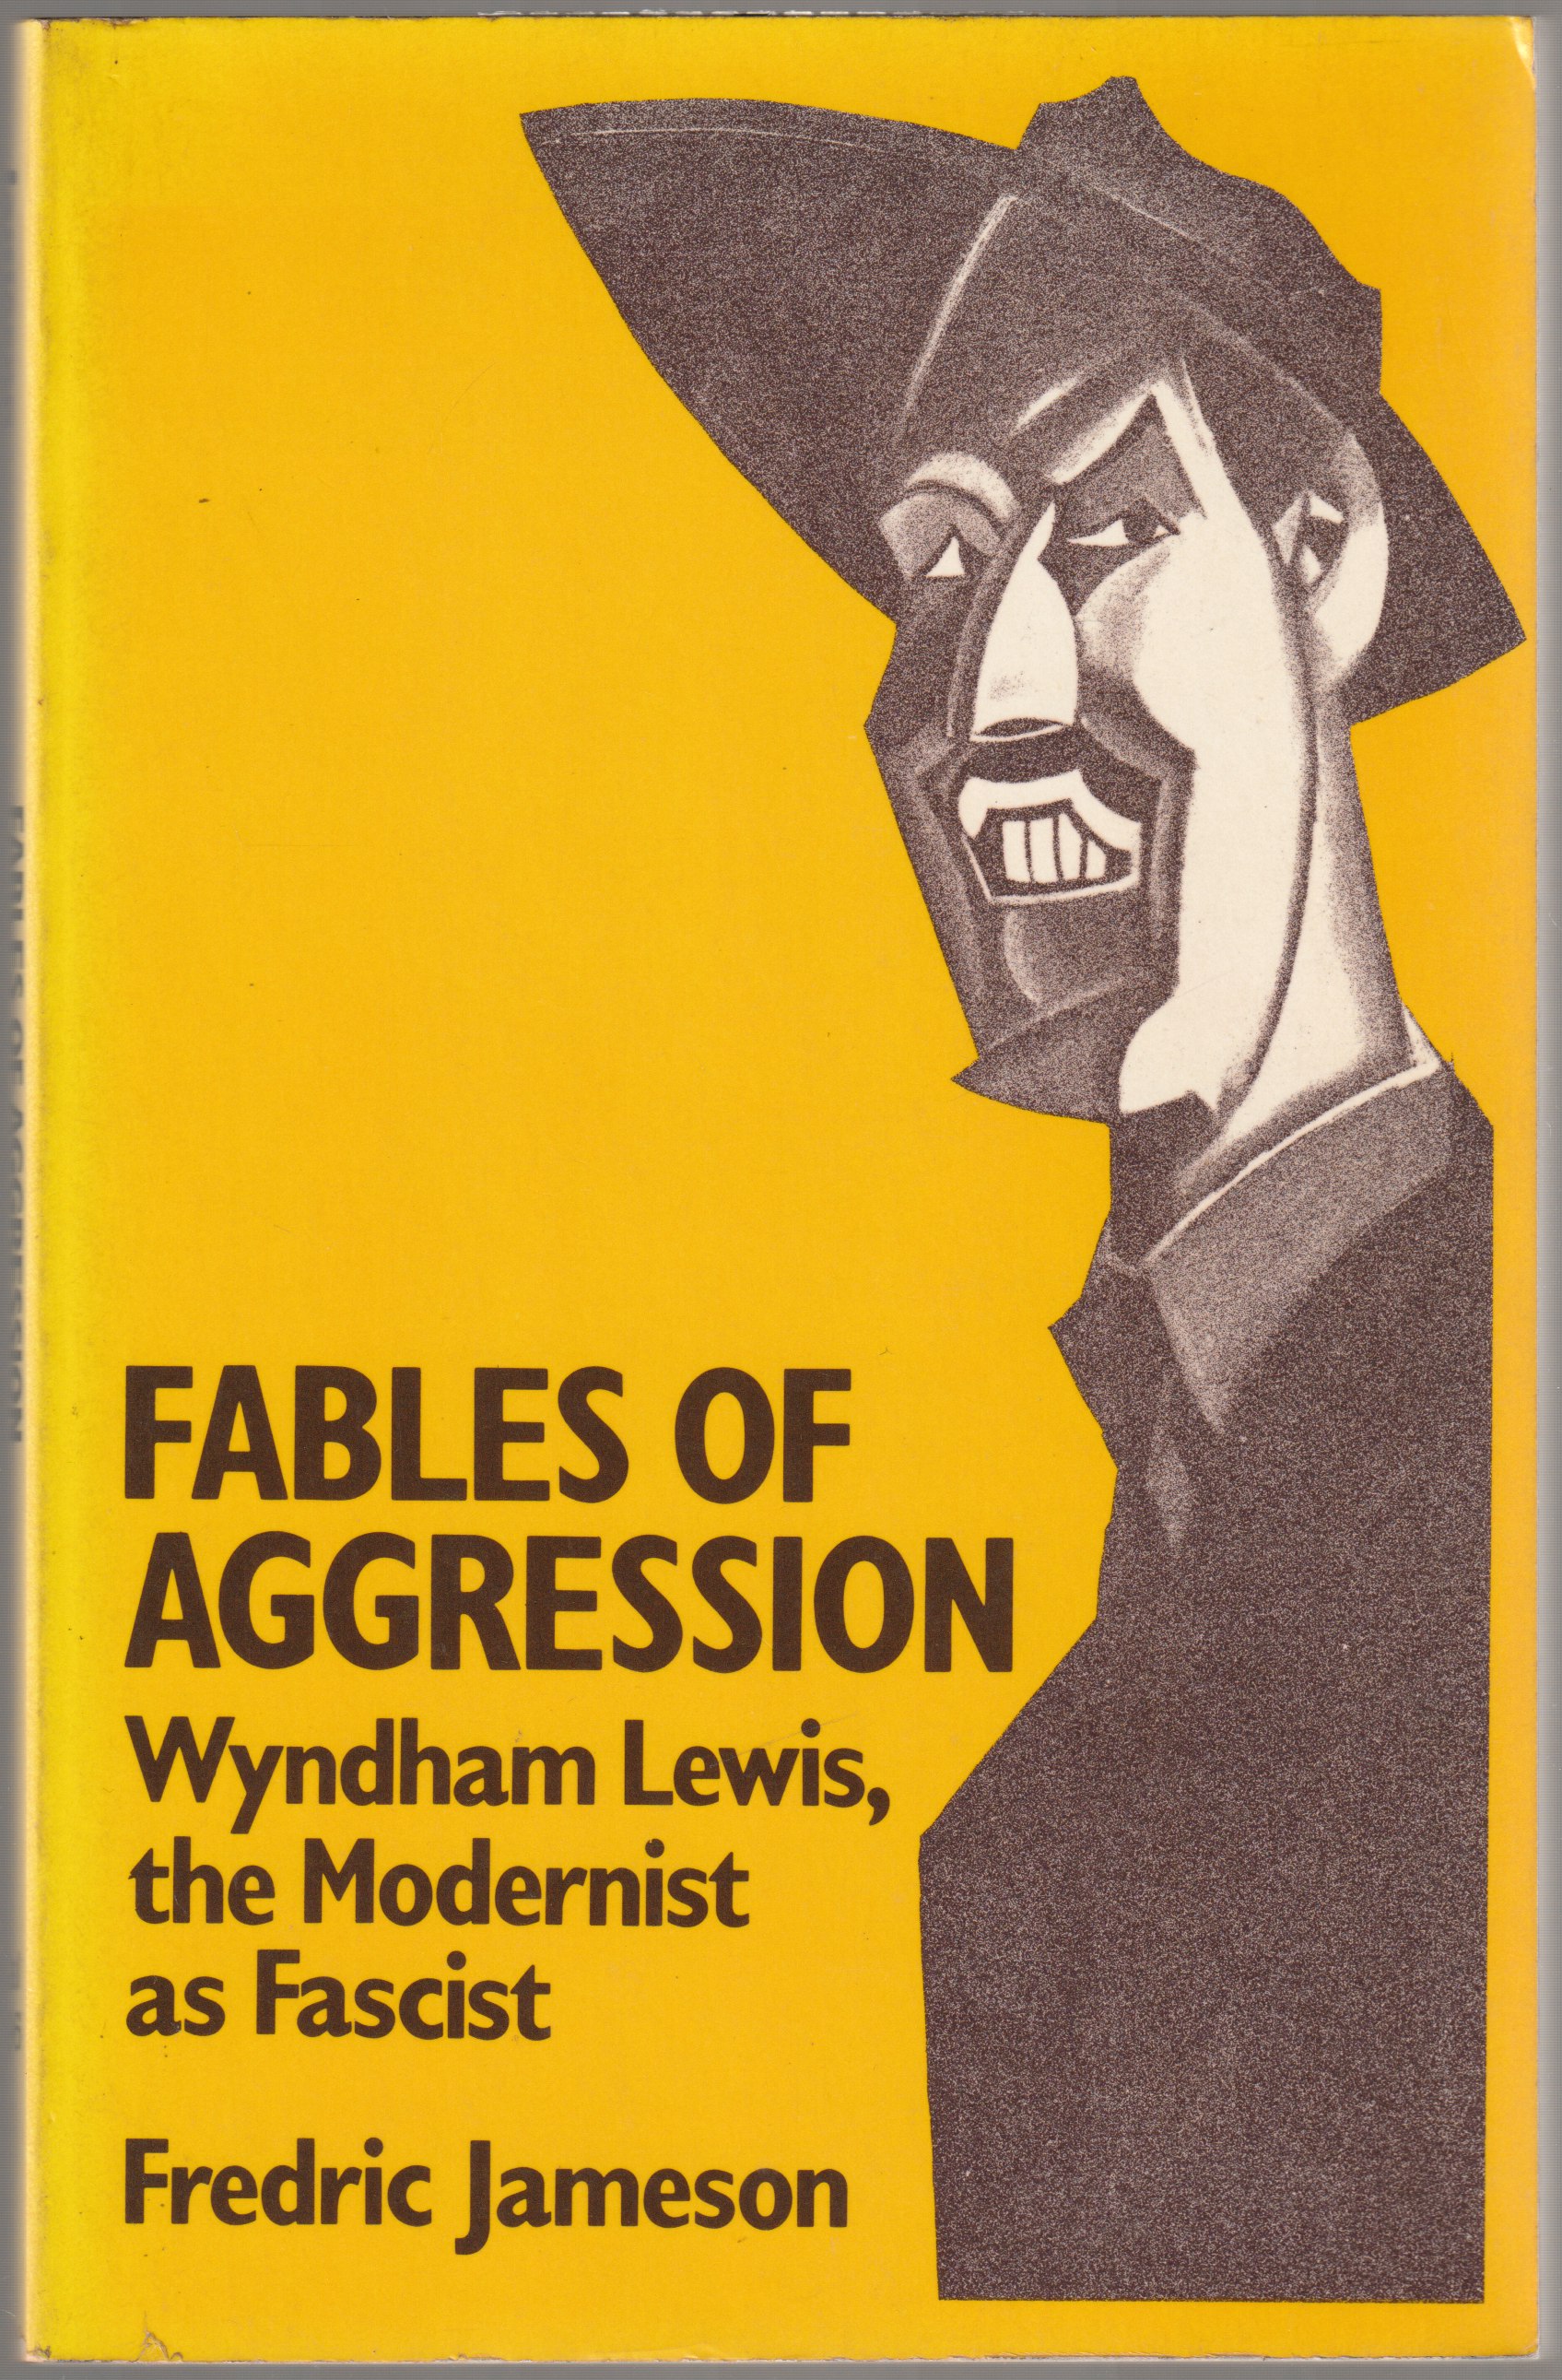 Fables of aggression : Wyndham Lewis, the modernist as fascist